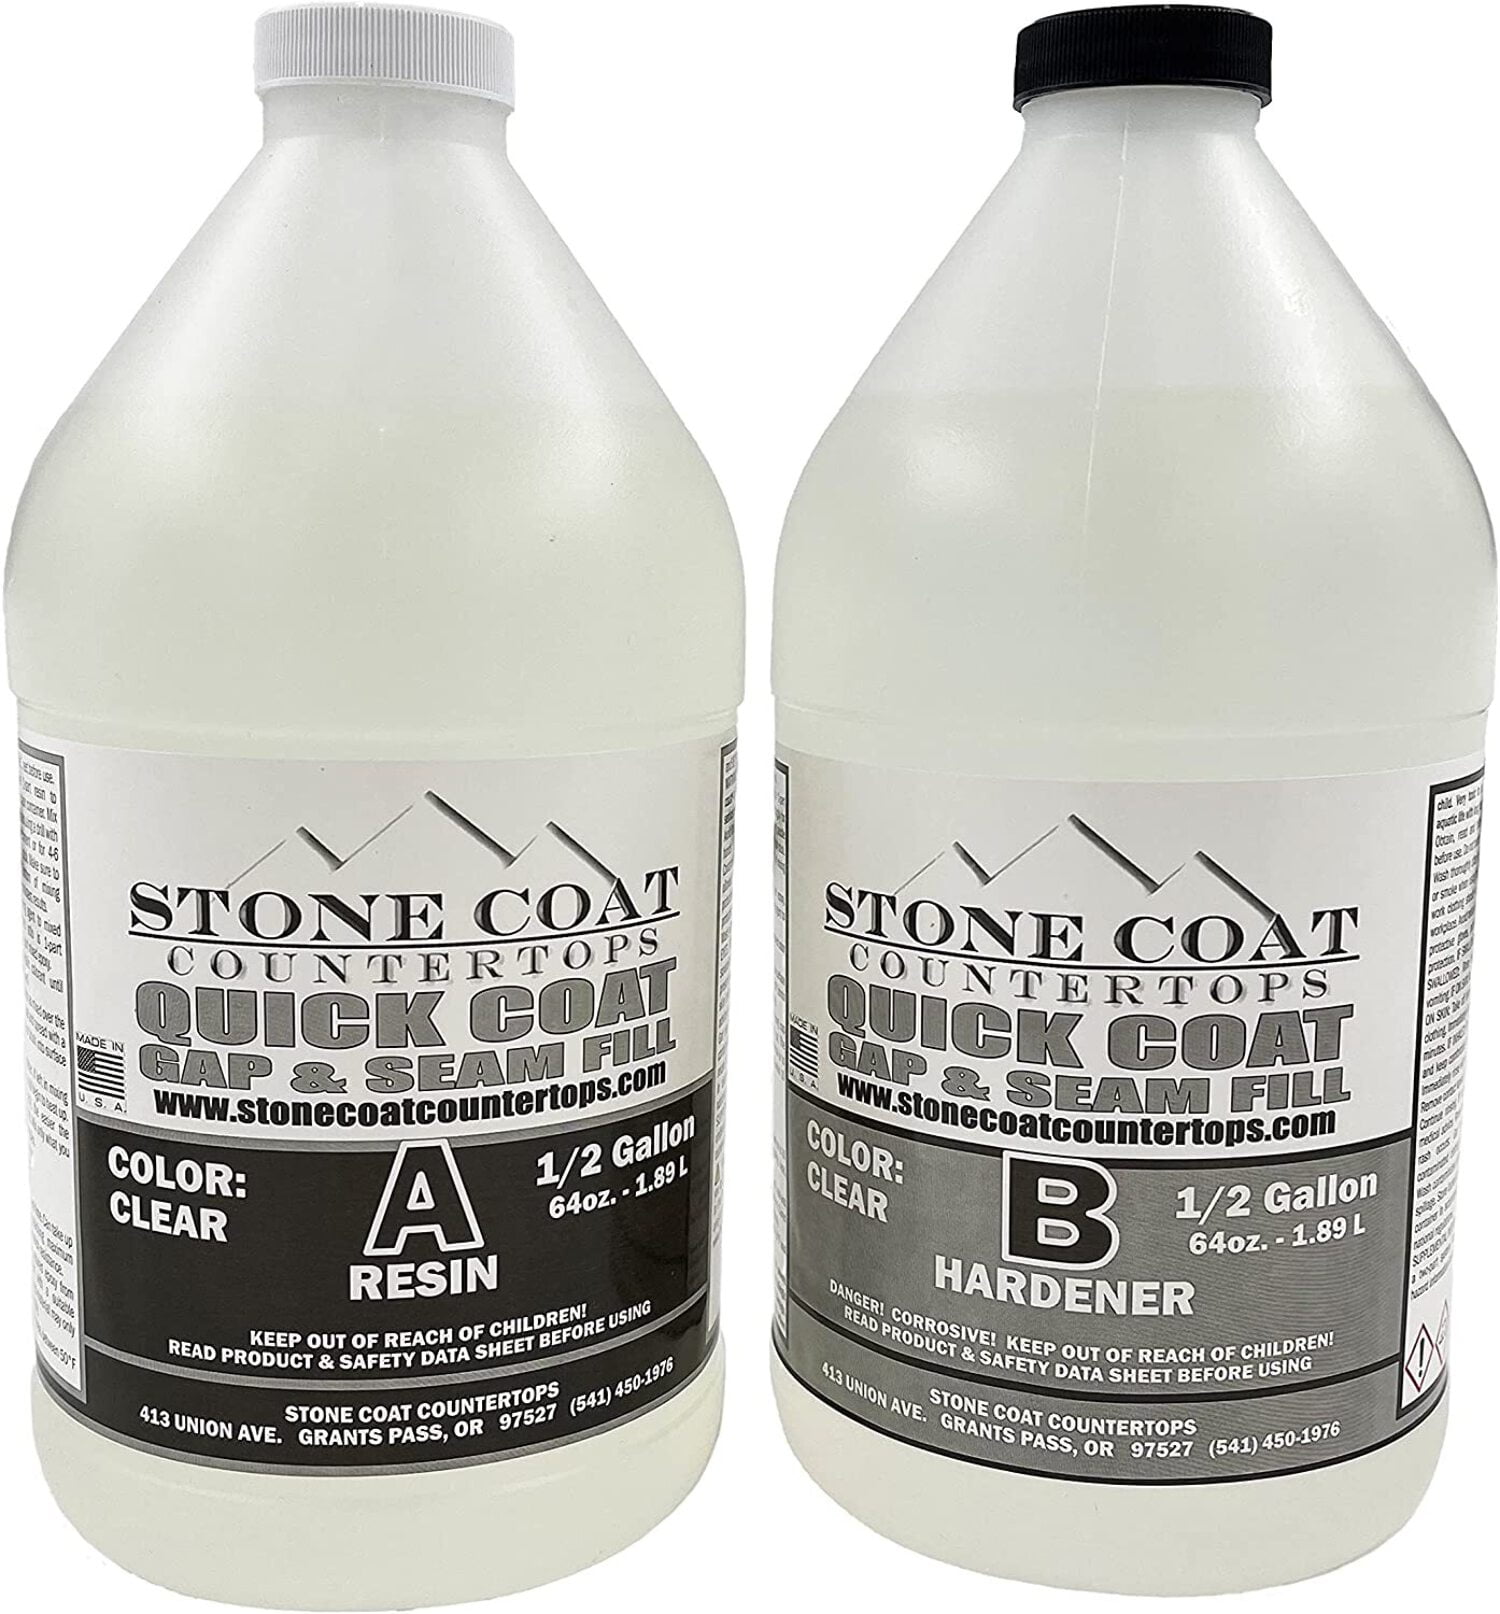 Stone Coat Floor Patch Epoxy Gel - Easy to Apply, Fills Gaps and